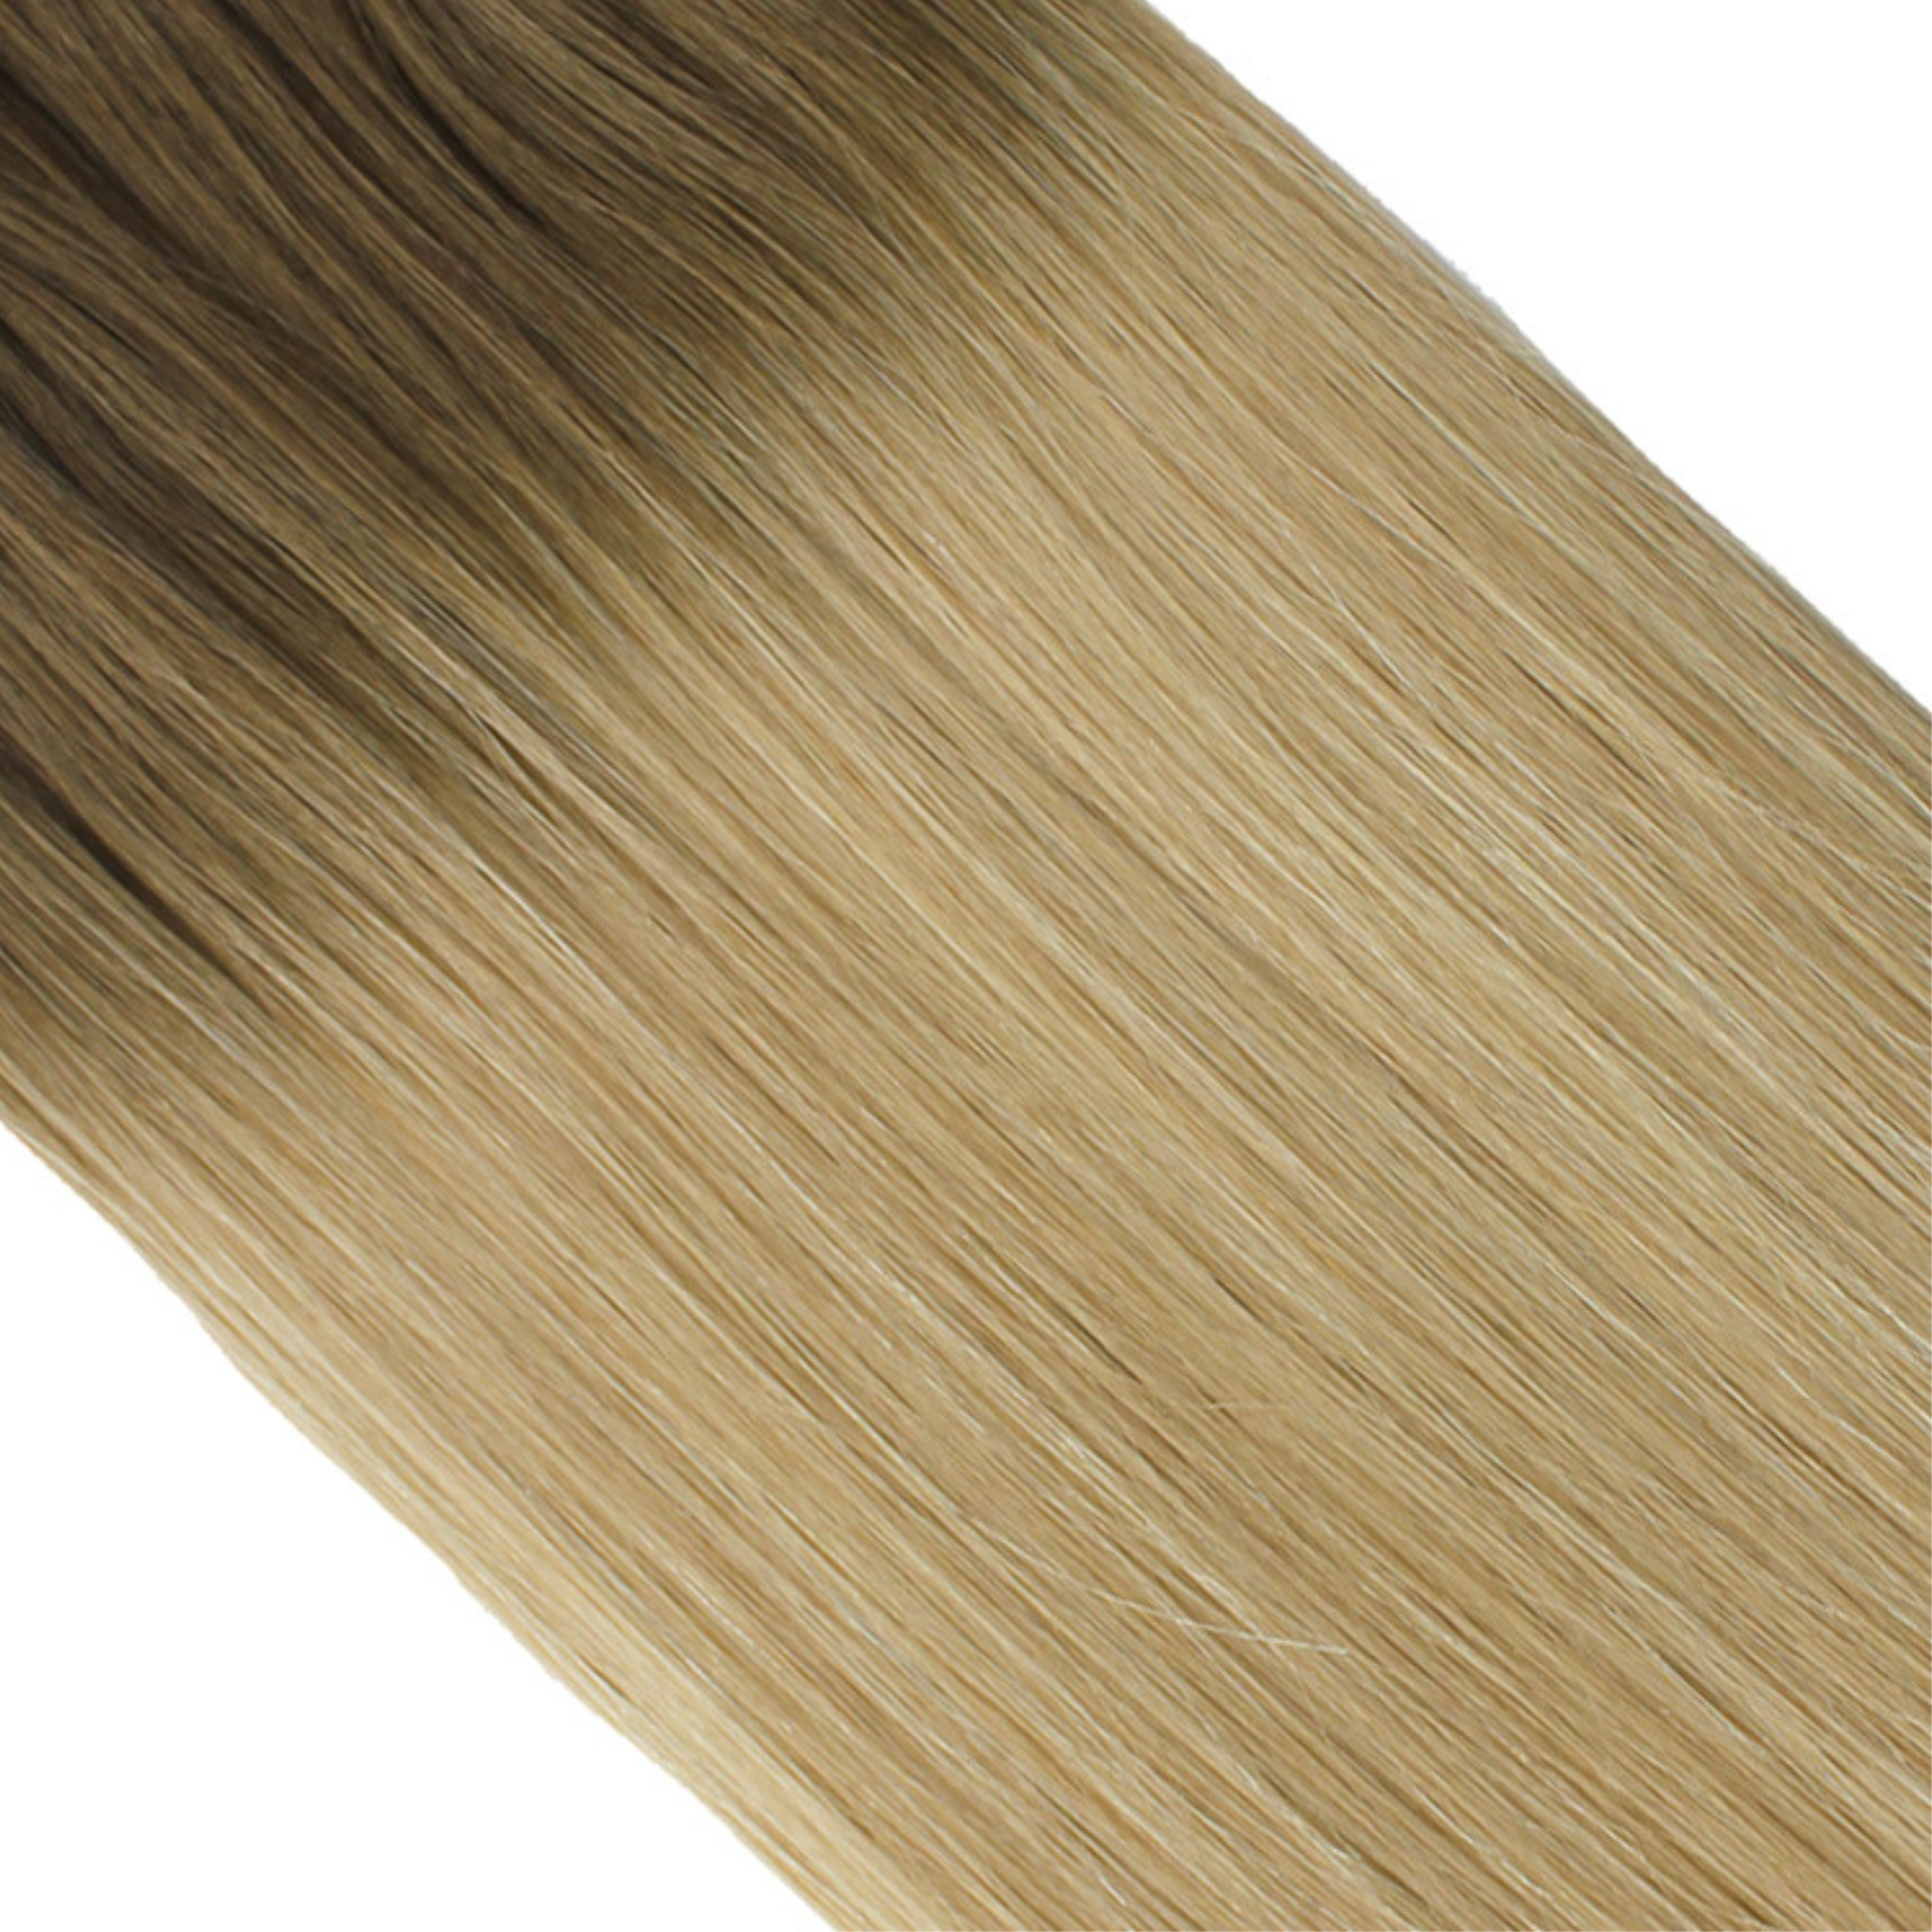 "hair rehab london 14" tape hair extensions shade swatch titled rooted dirty blonde"